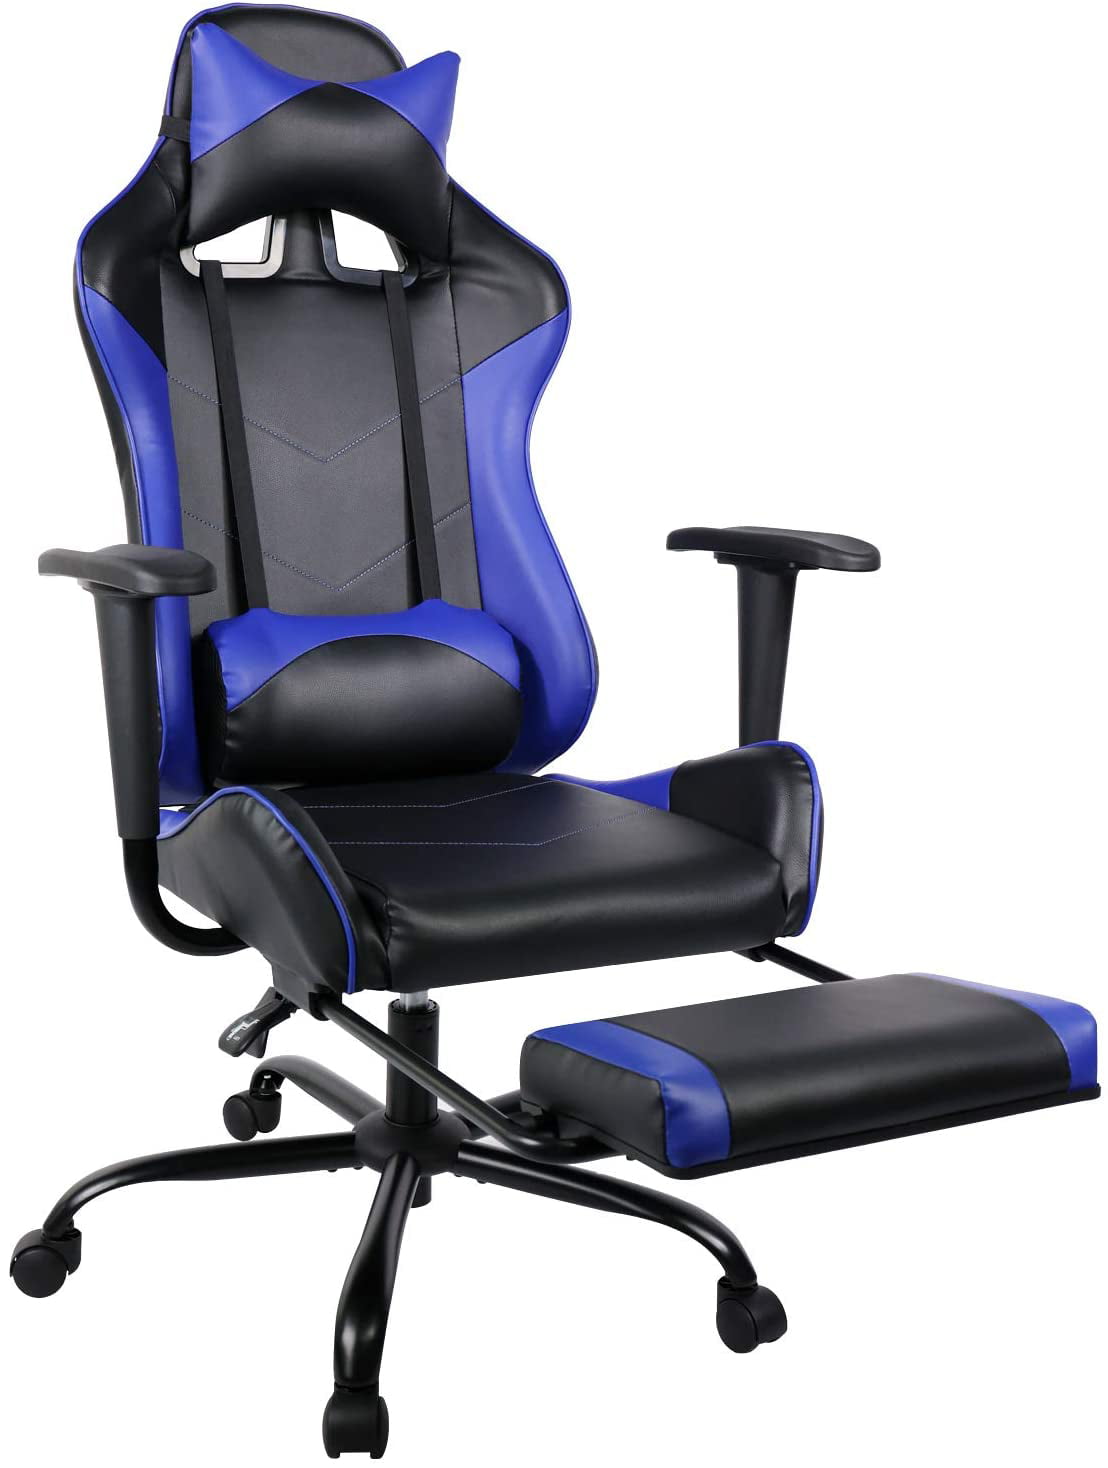 GAMING CHAIR RACING HOME OFFICE CHAIR EXECUTIVE SWIVEL RECLINER LEATHER+FOOTREST 